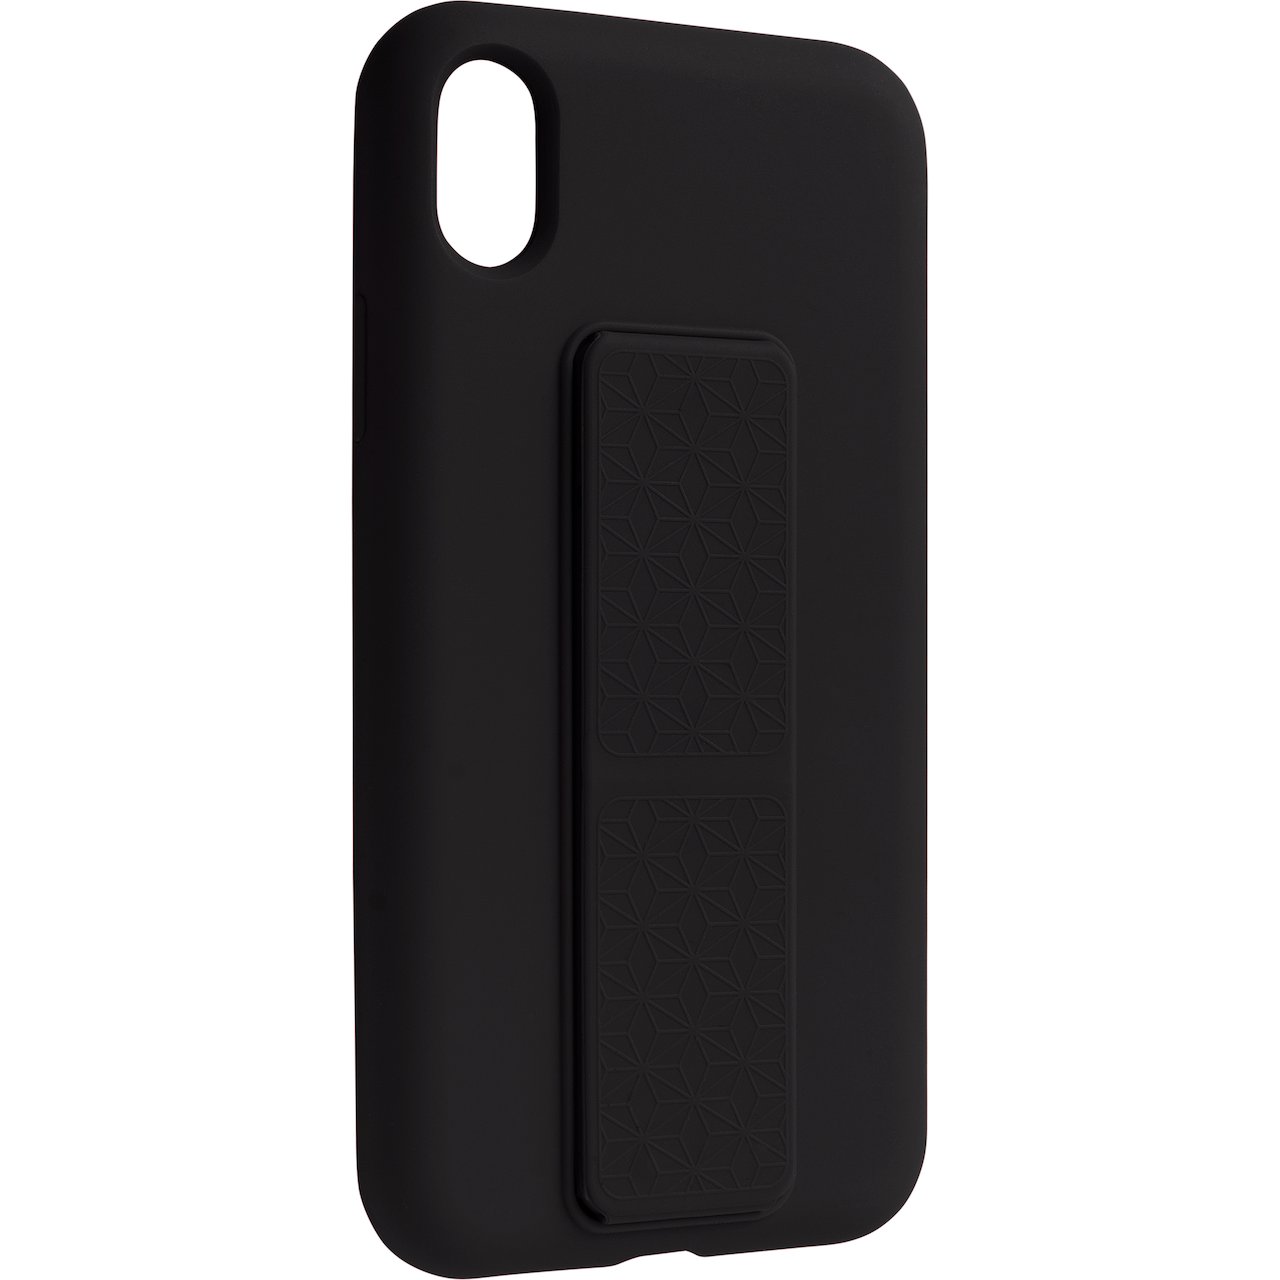 LEKI BYCPH COVER TIL IPHONE XR GRIP AND STAND SILIKON SORT